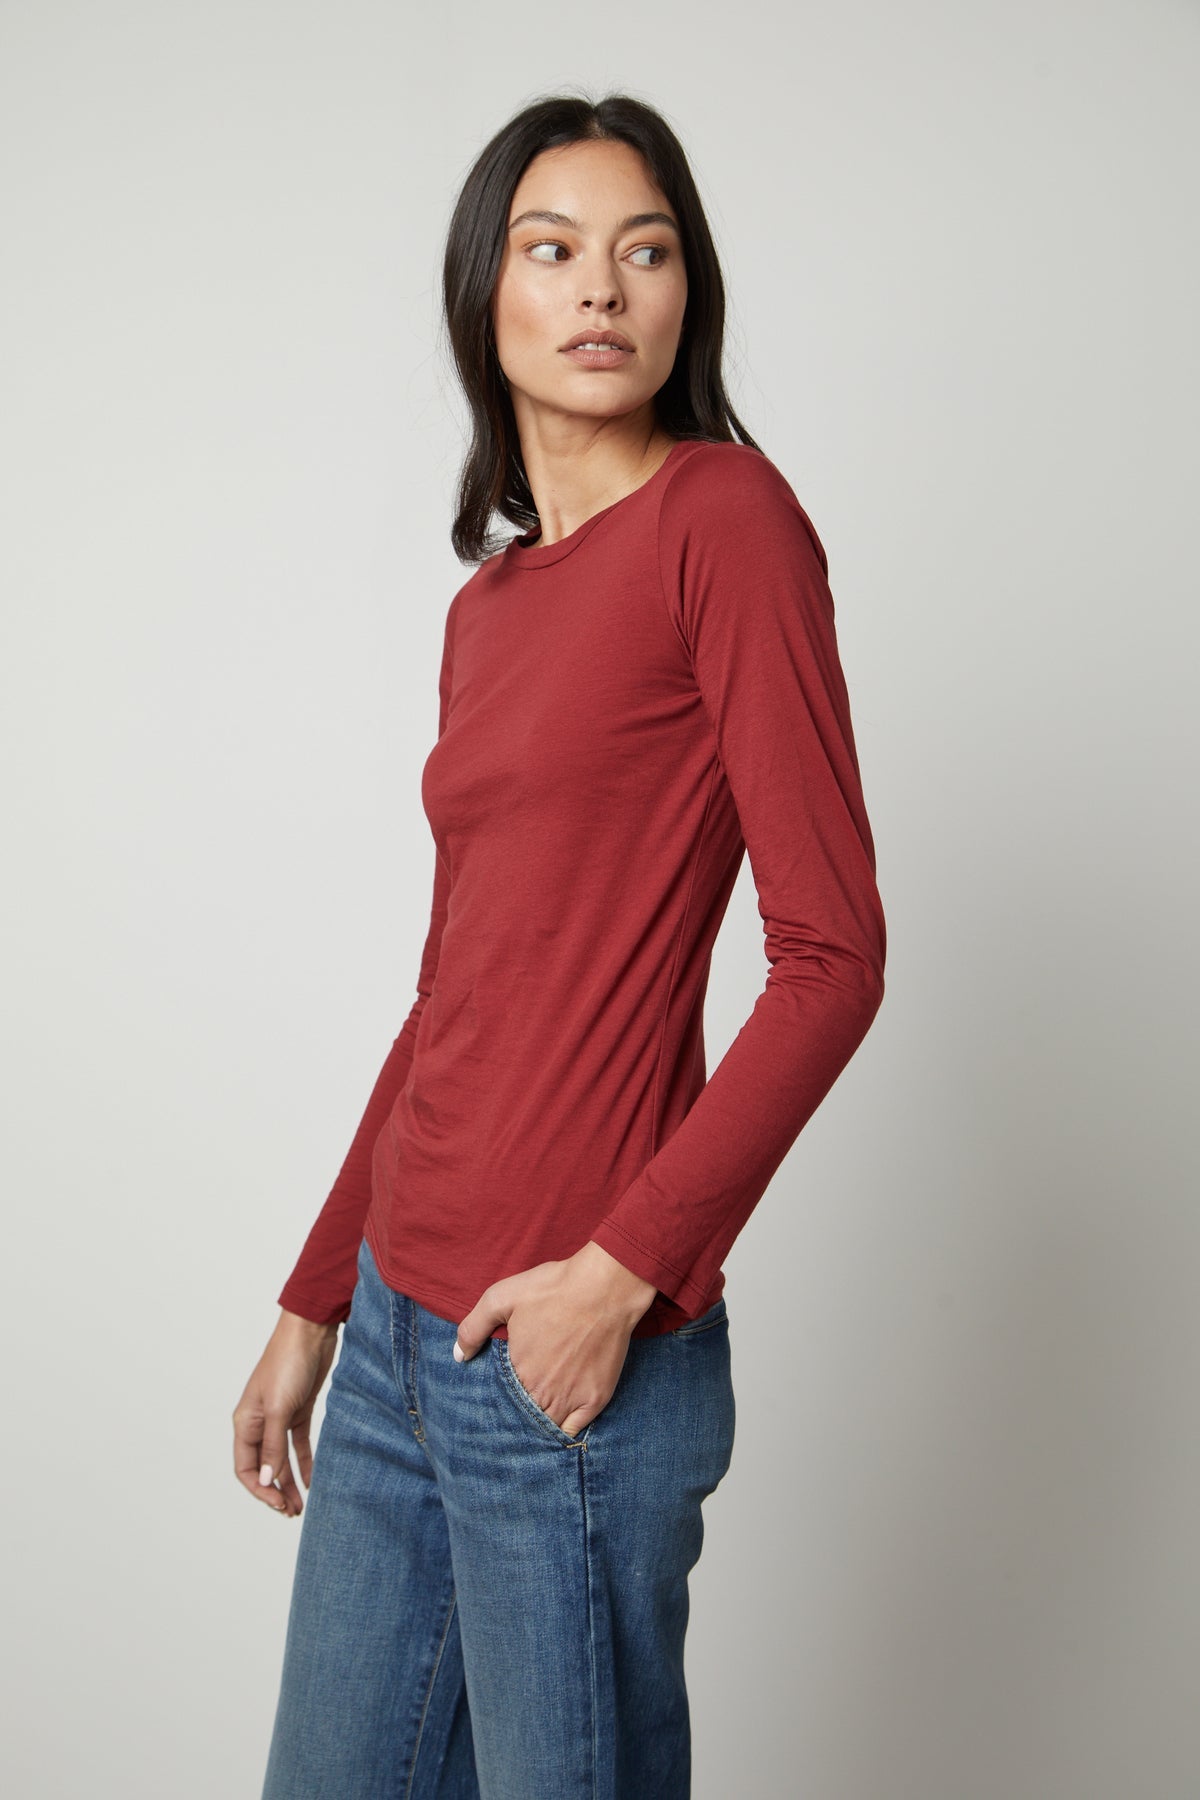 The model is wearing a red long-sleeved ZOFINA GAUZY WHISPER FITTED CREW NECK TEE by Velvet by Graham & Spencer.-35783263191233